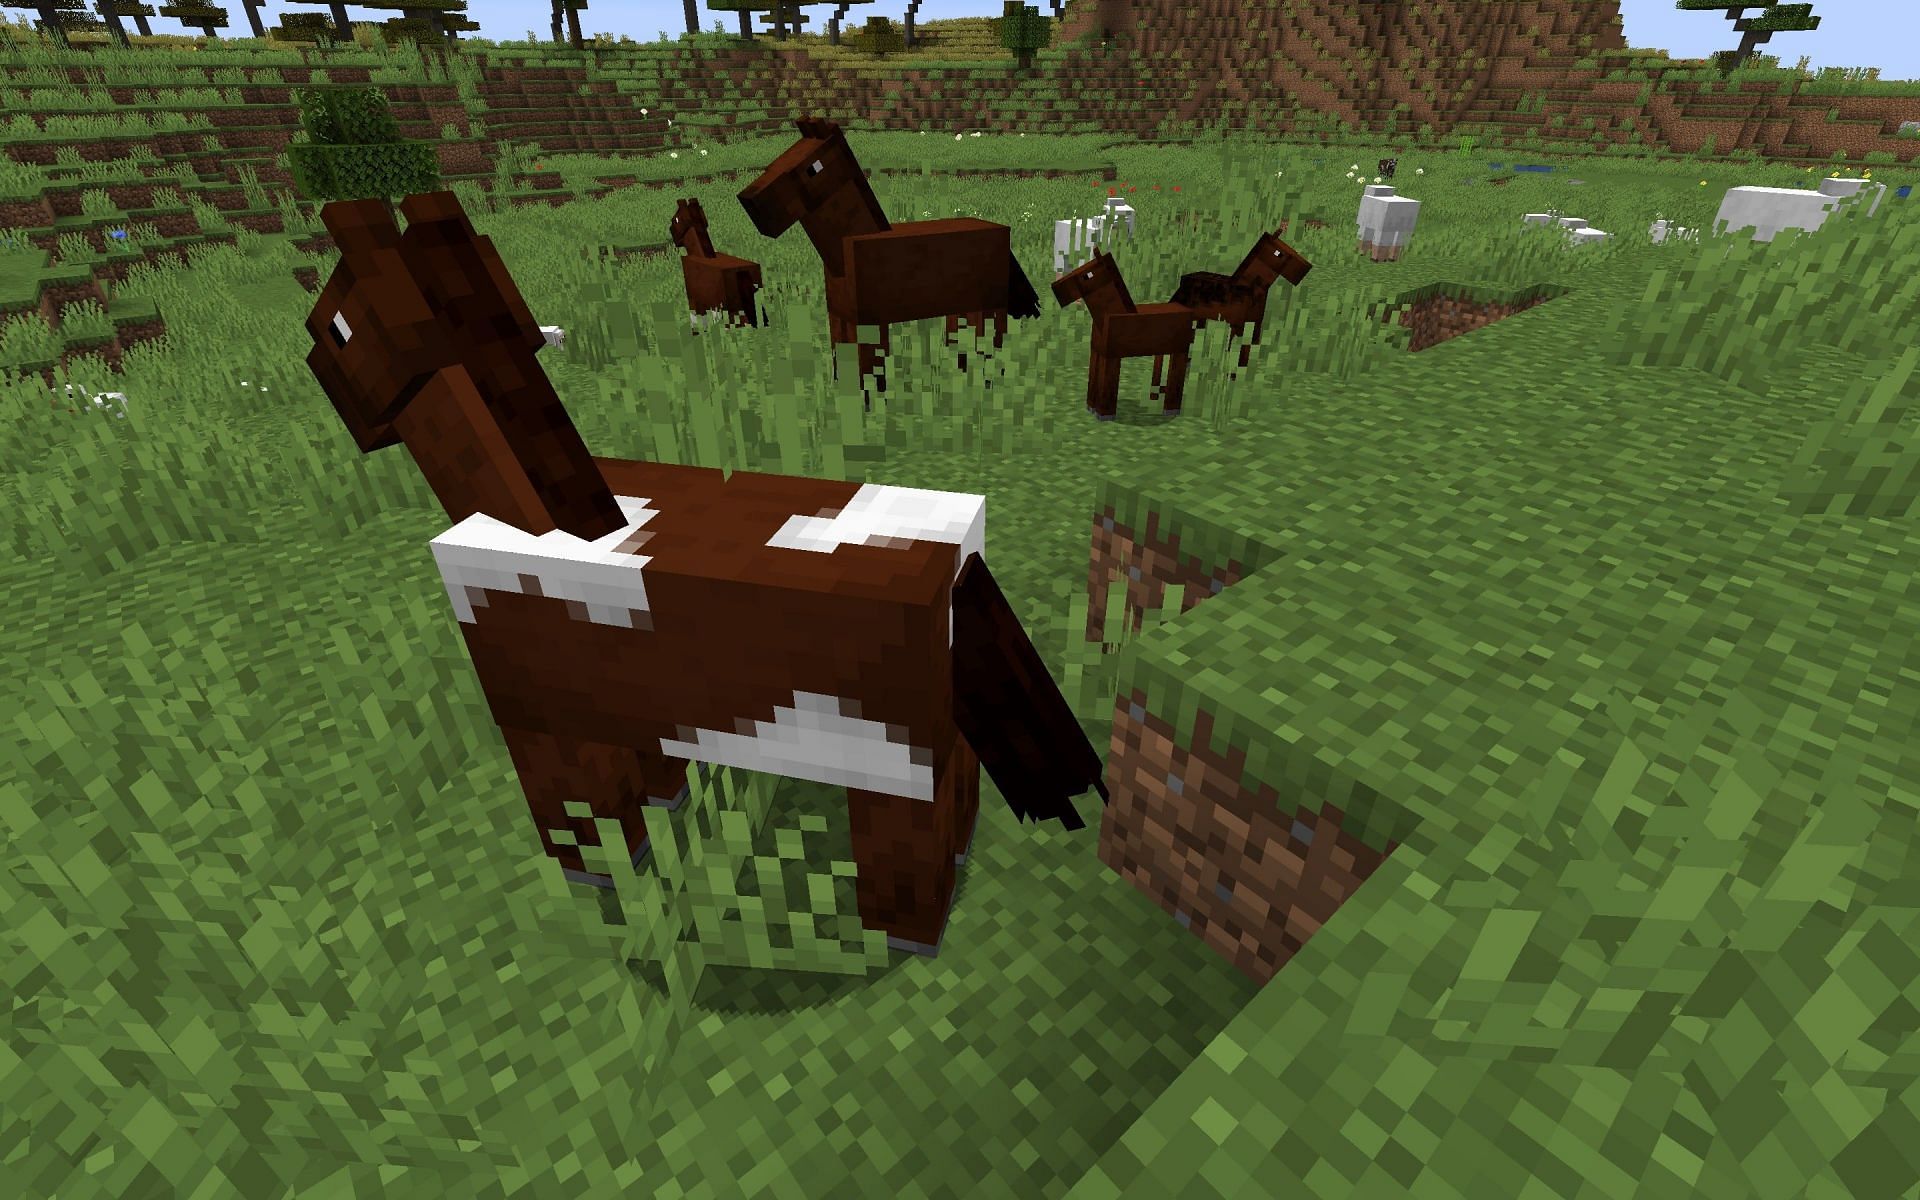 A field filled with horses. (Image via Minecraft)